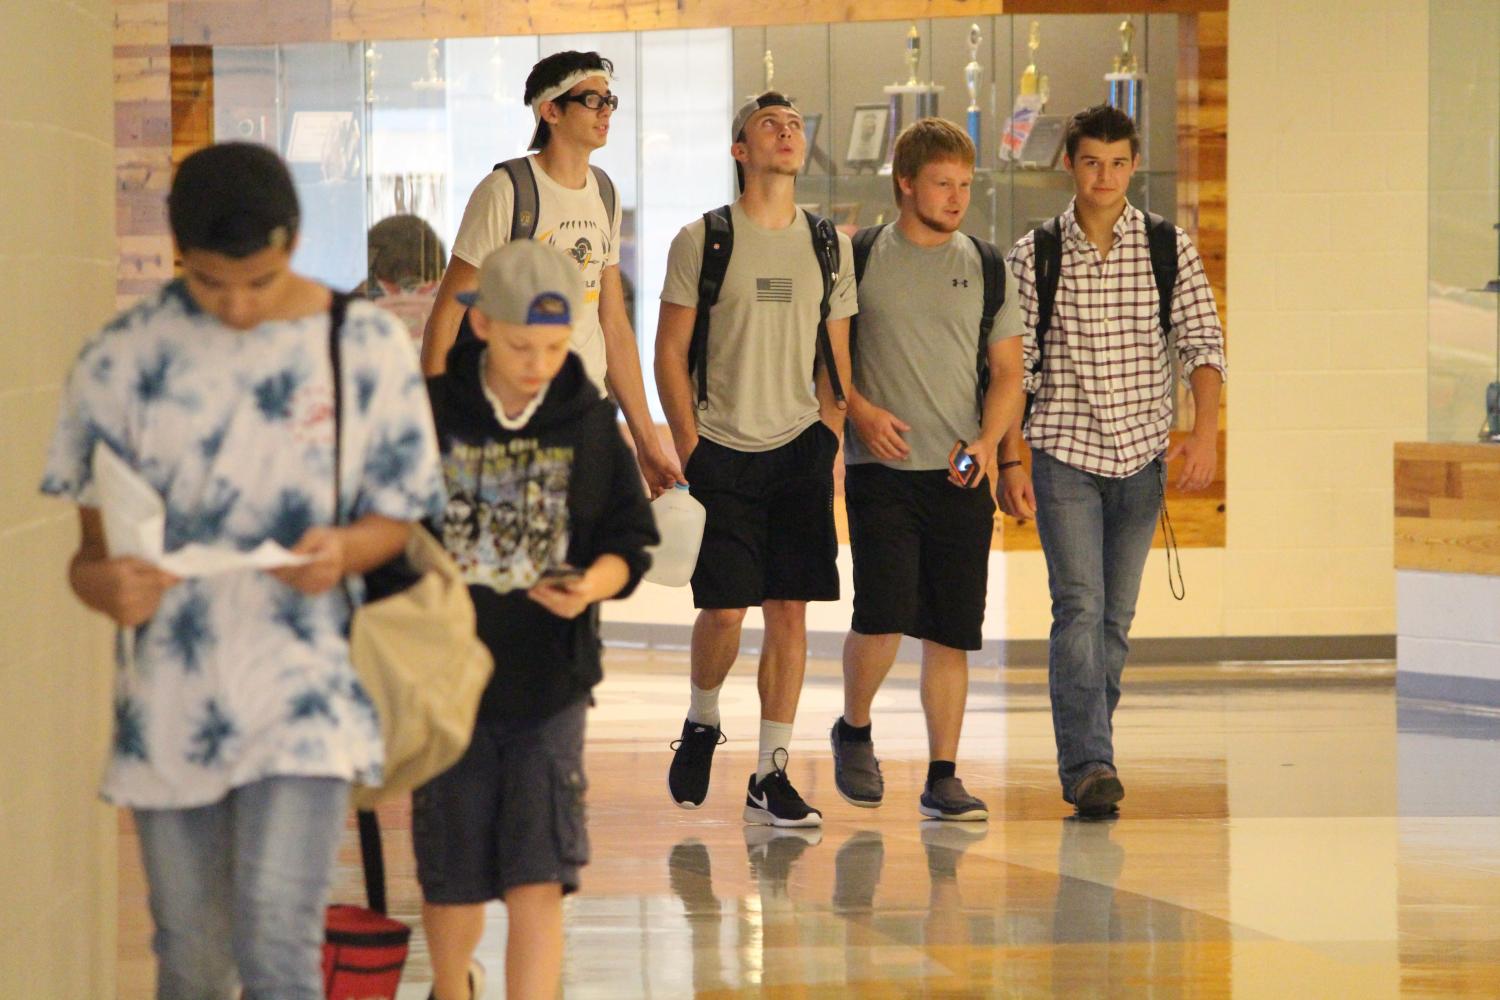 Jason McGuire, Jackson Keller, Payton Roberts, and Nick Schlude find their classes on the first day of school.